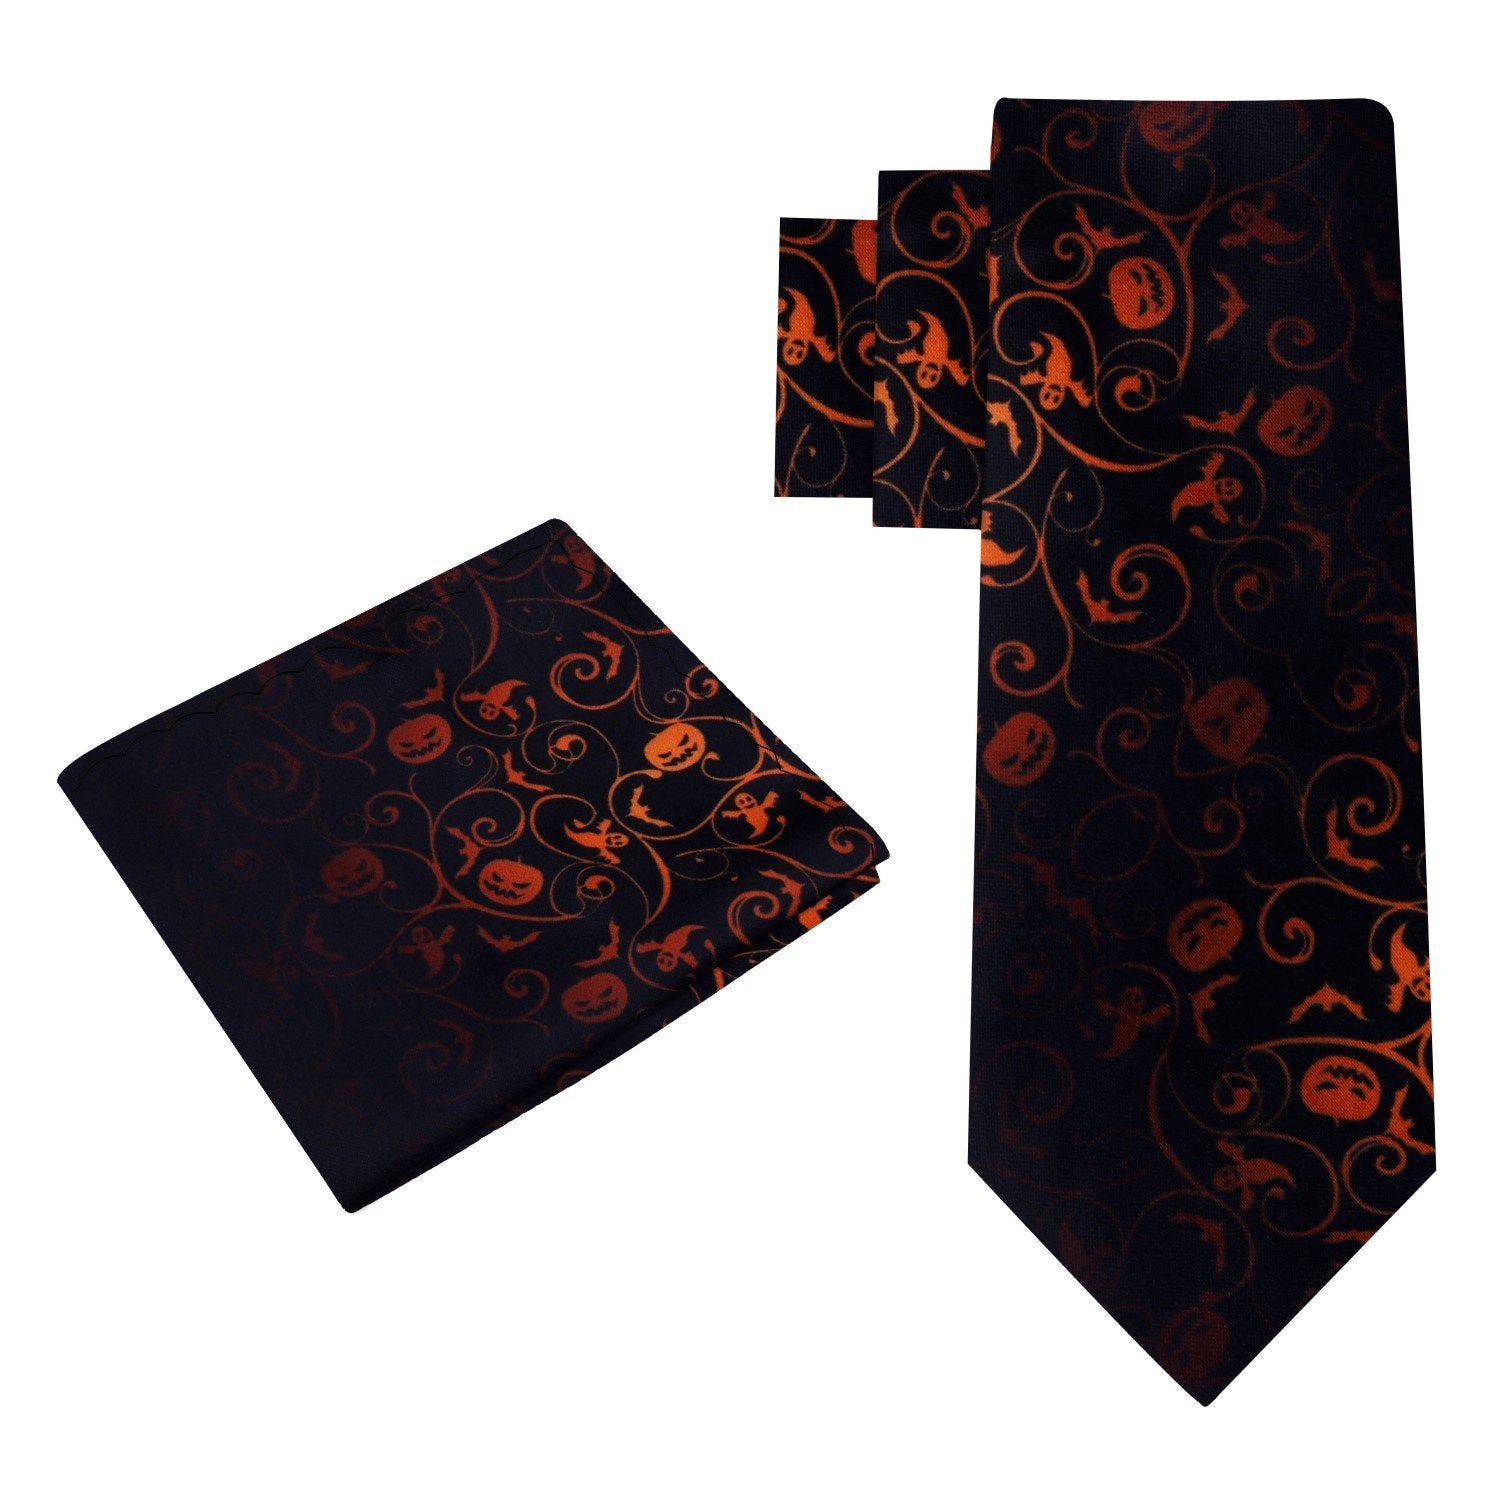 Alt View: Black and Orange Haunted Halloween Tie and Pocket Square